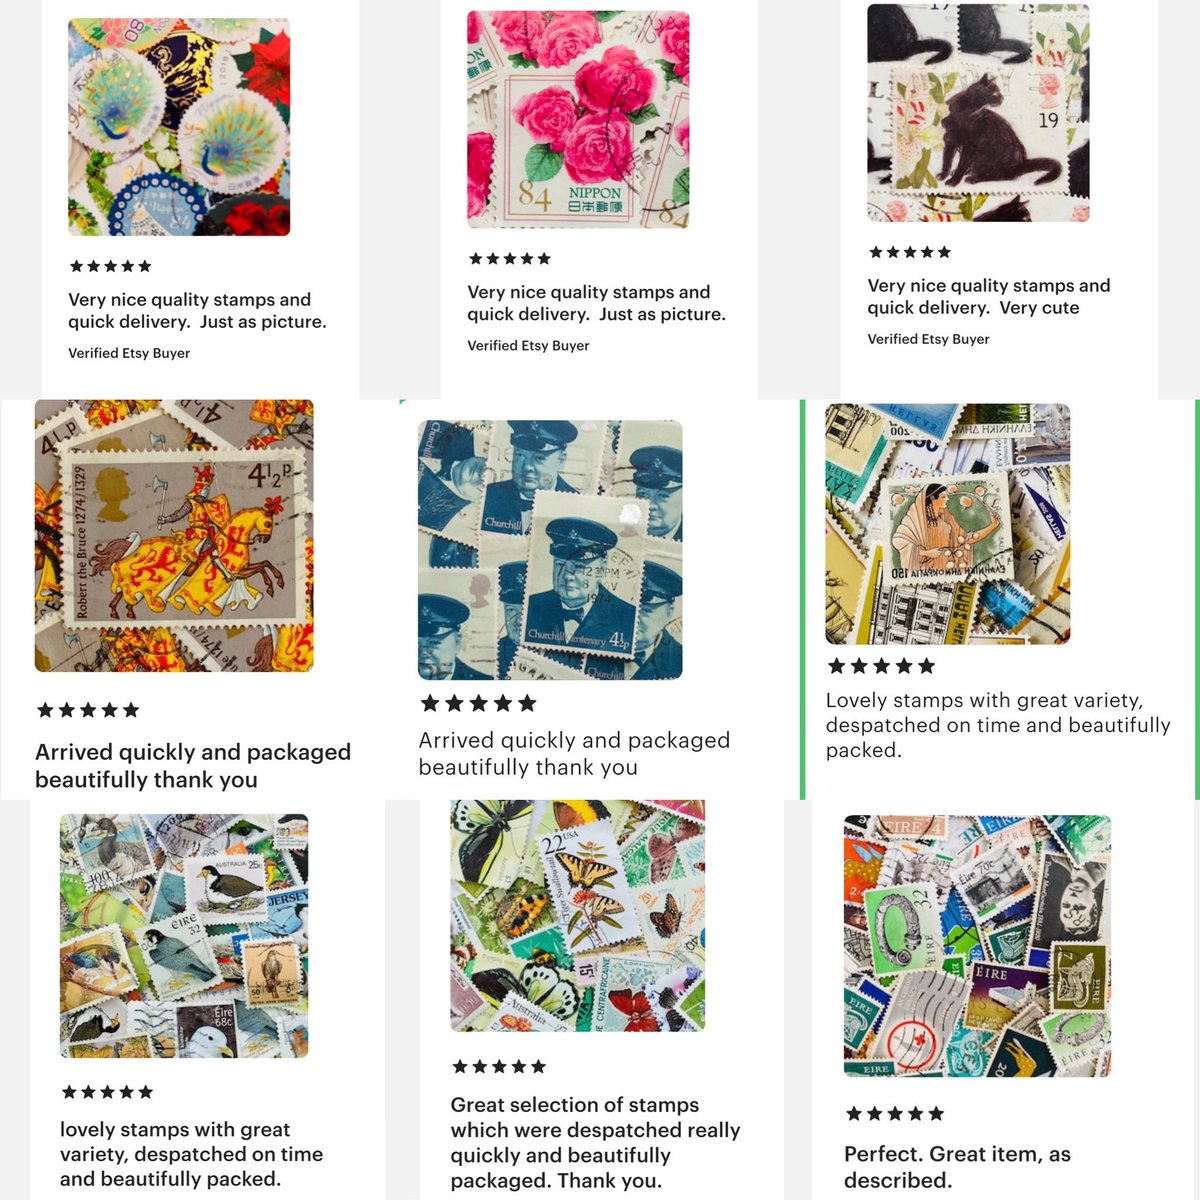 🌟🌟🌟Customer Appreciation 🌟🌟🌟Here’s some customer reviews whilst I’ve been away.  Thank you so much for loving stamps like I do and for purchasing stamps for your upcoming projects.  #craftbizparty #earlybiz #mhhsbd  #postagestamps #art  #stampart #postagestampart #philately